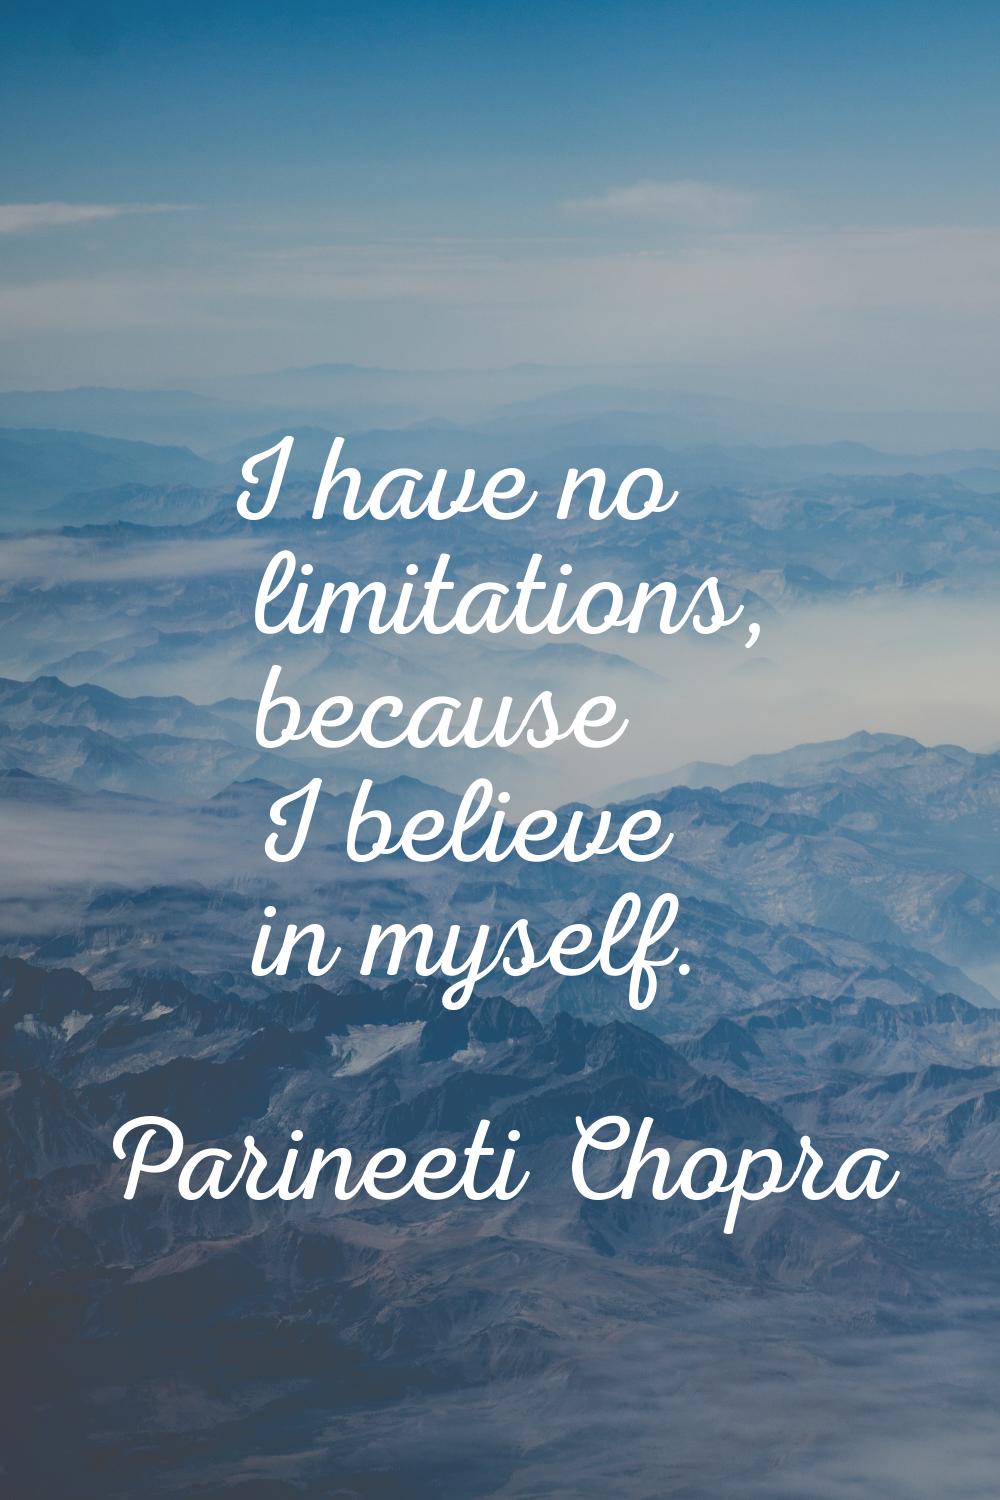 I have no limitations, because I believe in myself.